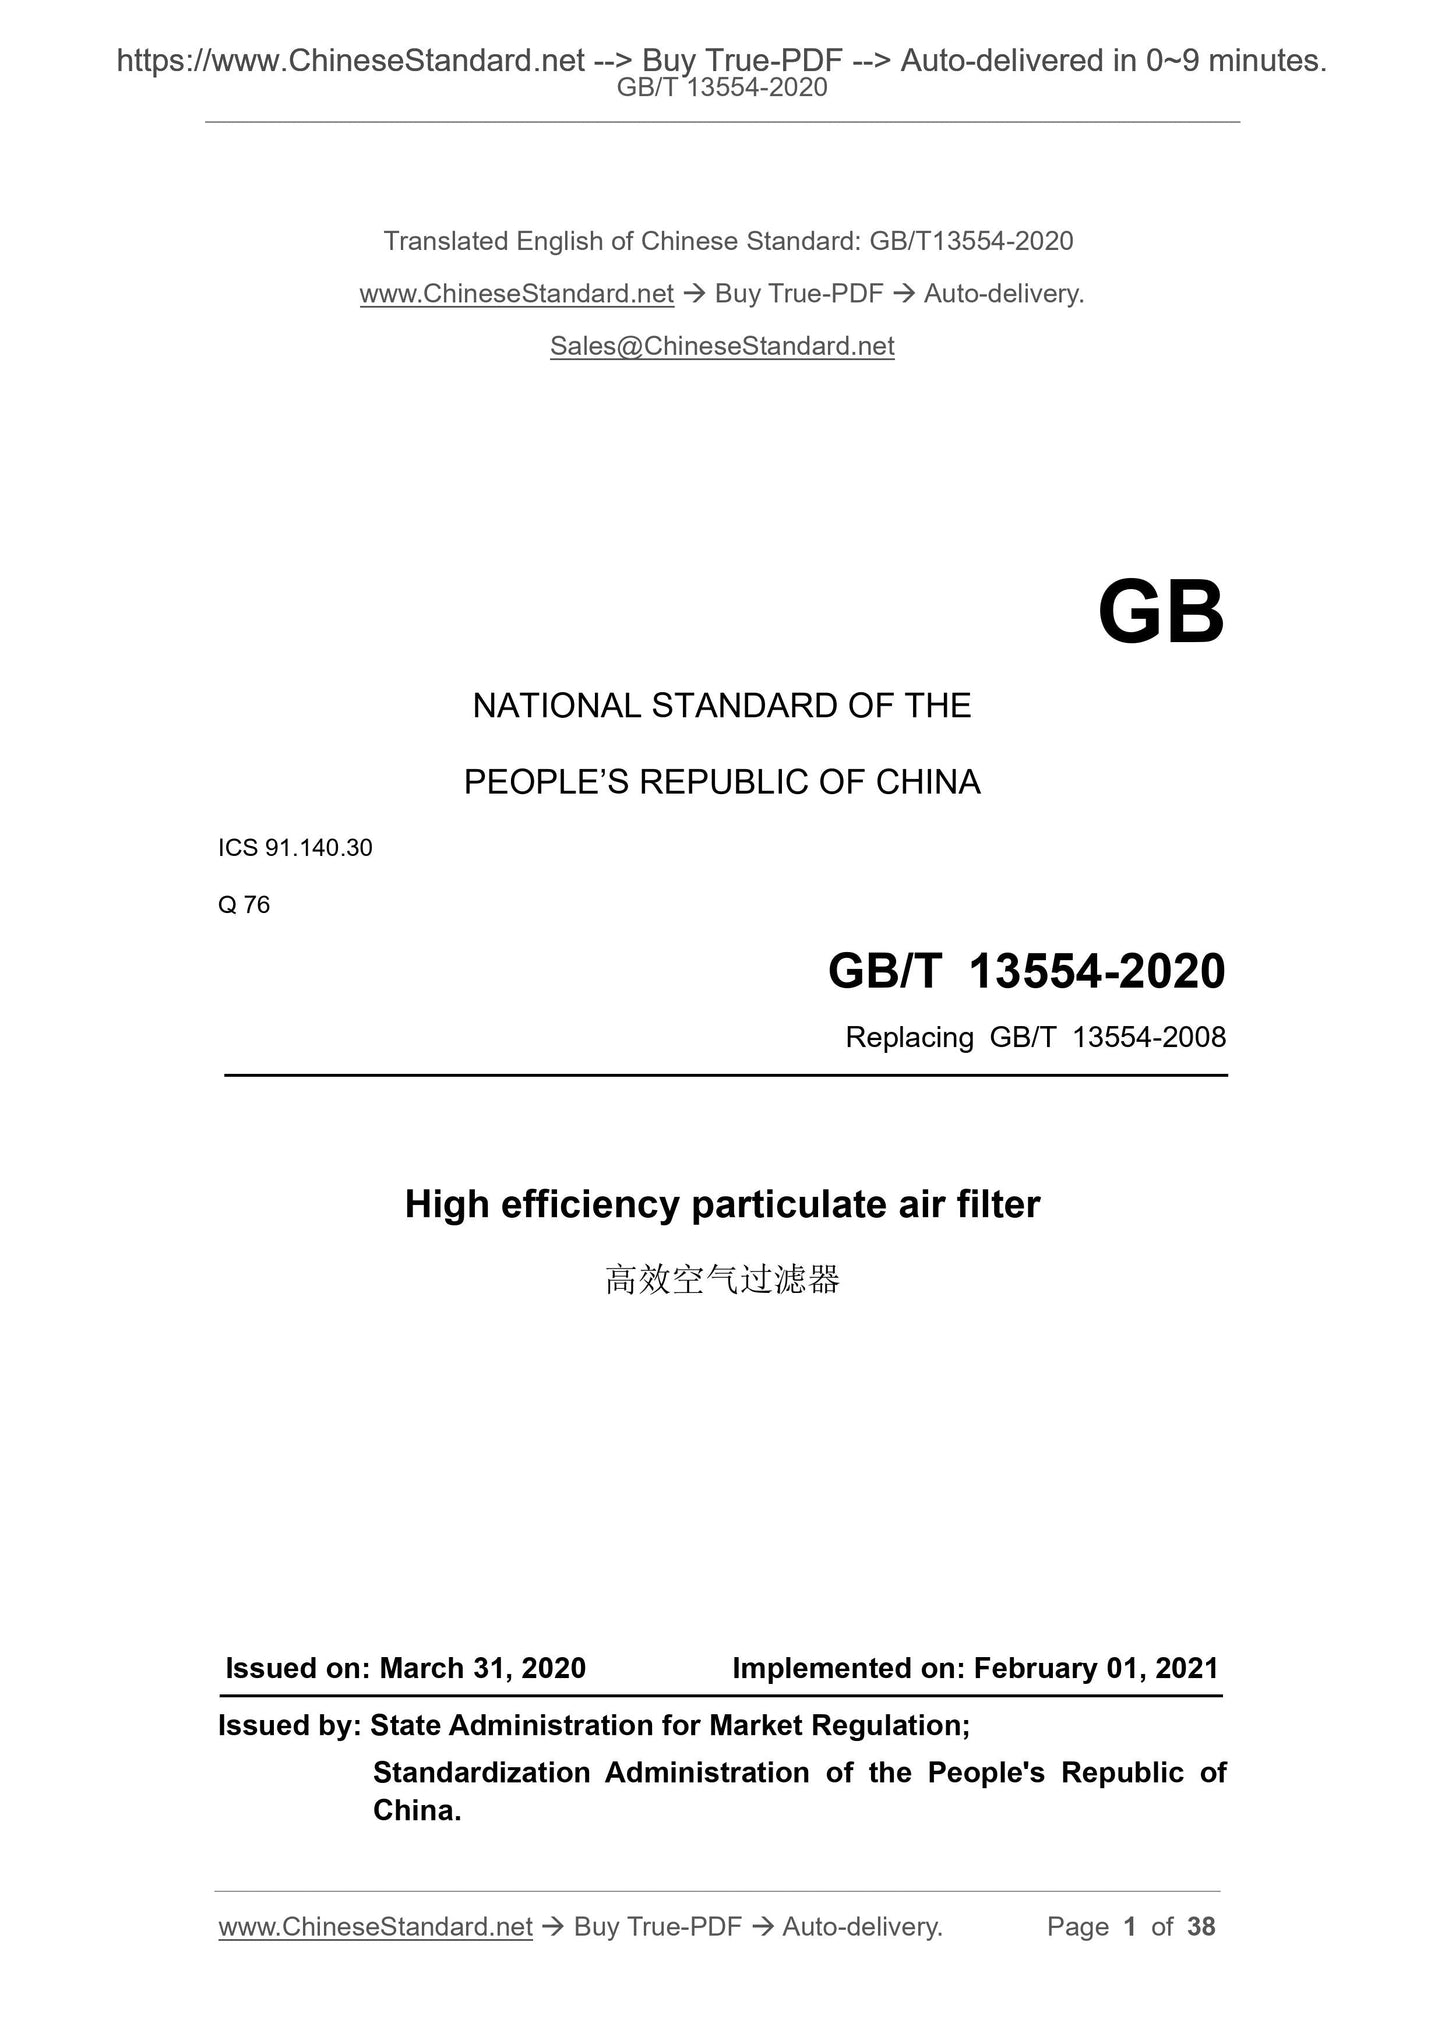 GB/T 13554-2020 Page 1